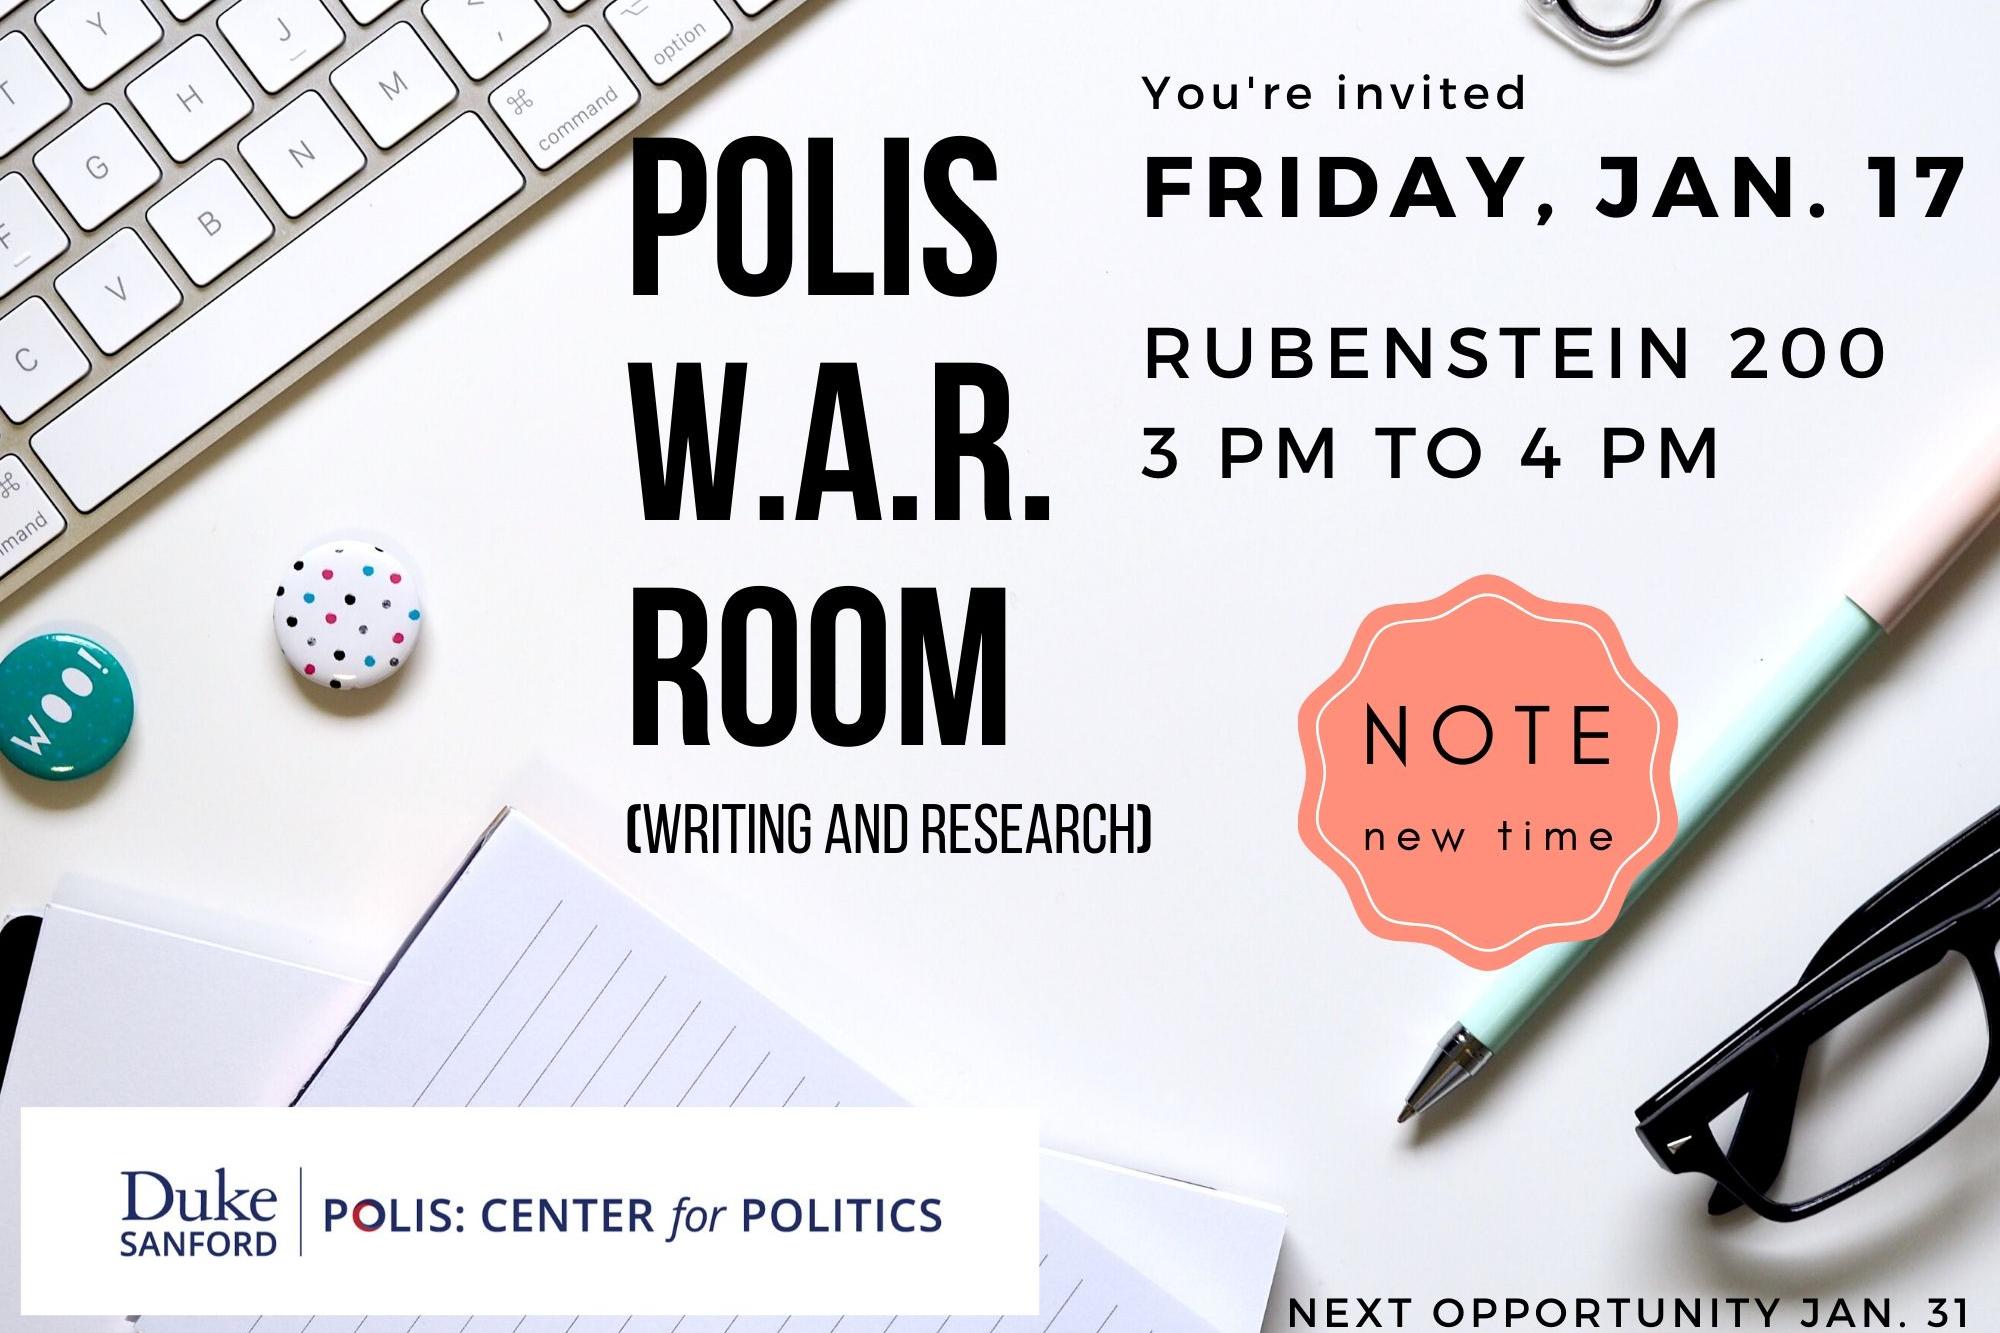 Join us in Rubenstein 200 at 3pm on Friday